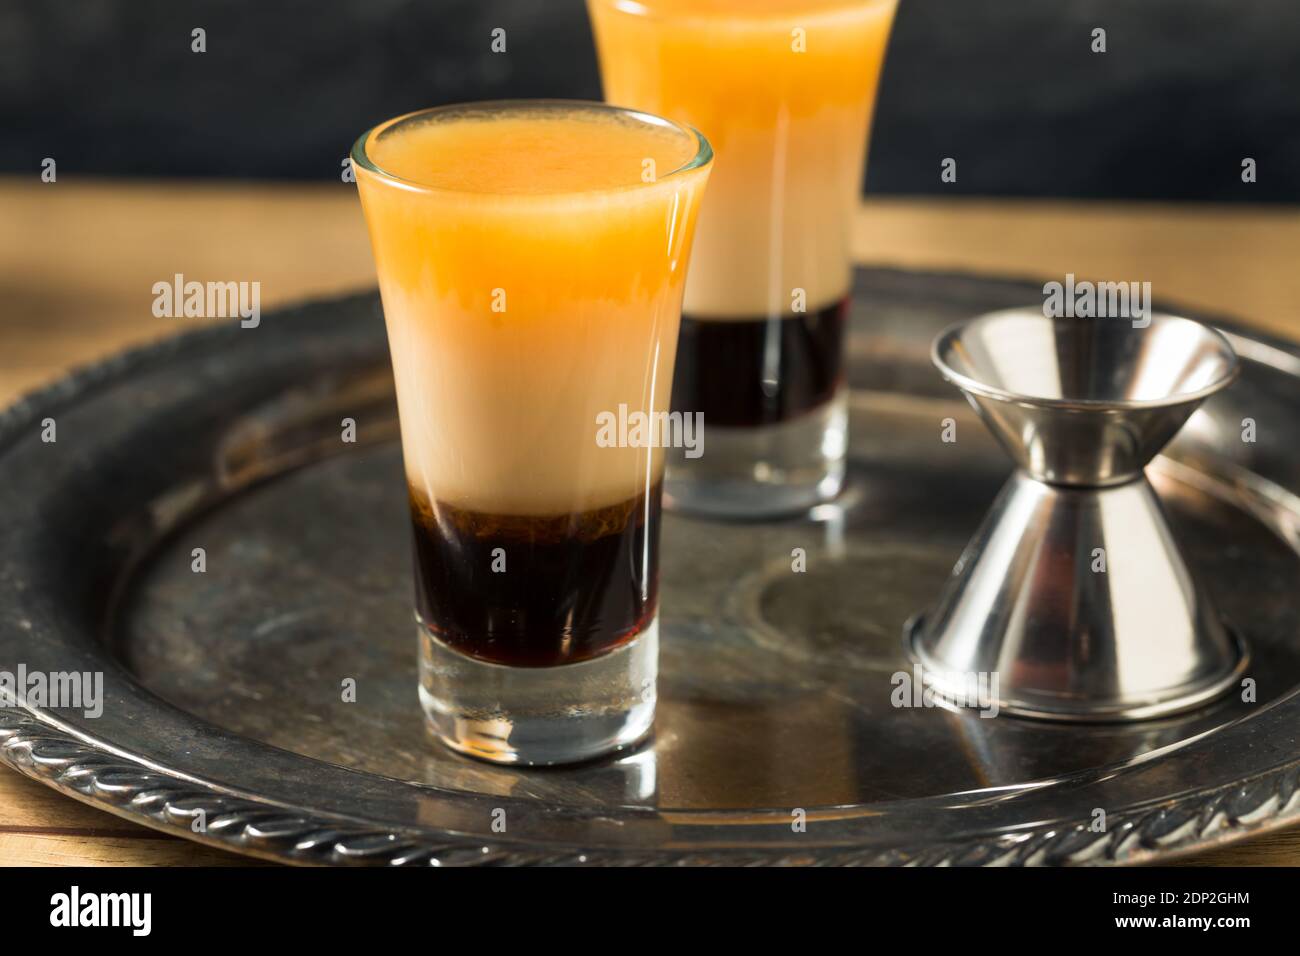 Boozy Layered B52 Shot Cocktail Ready to Drink Stock Photo